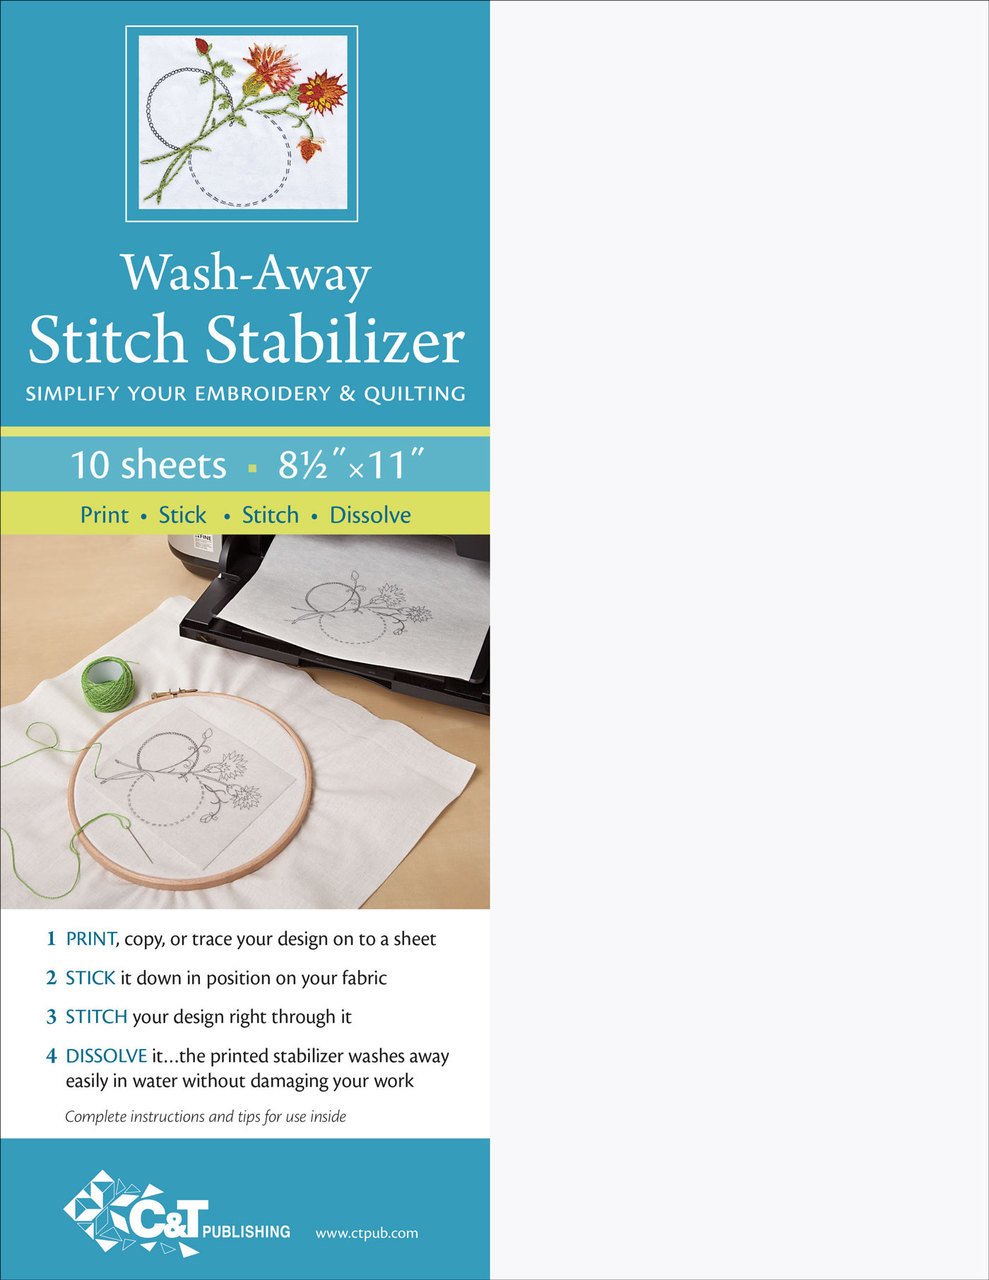 Water Soluble Stabilizer for Embroidery Stick and Stitch